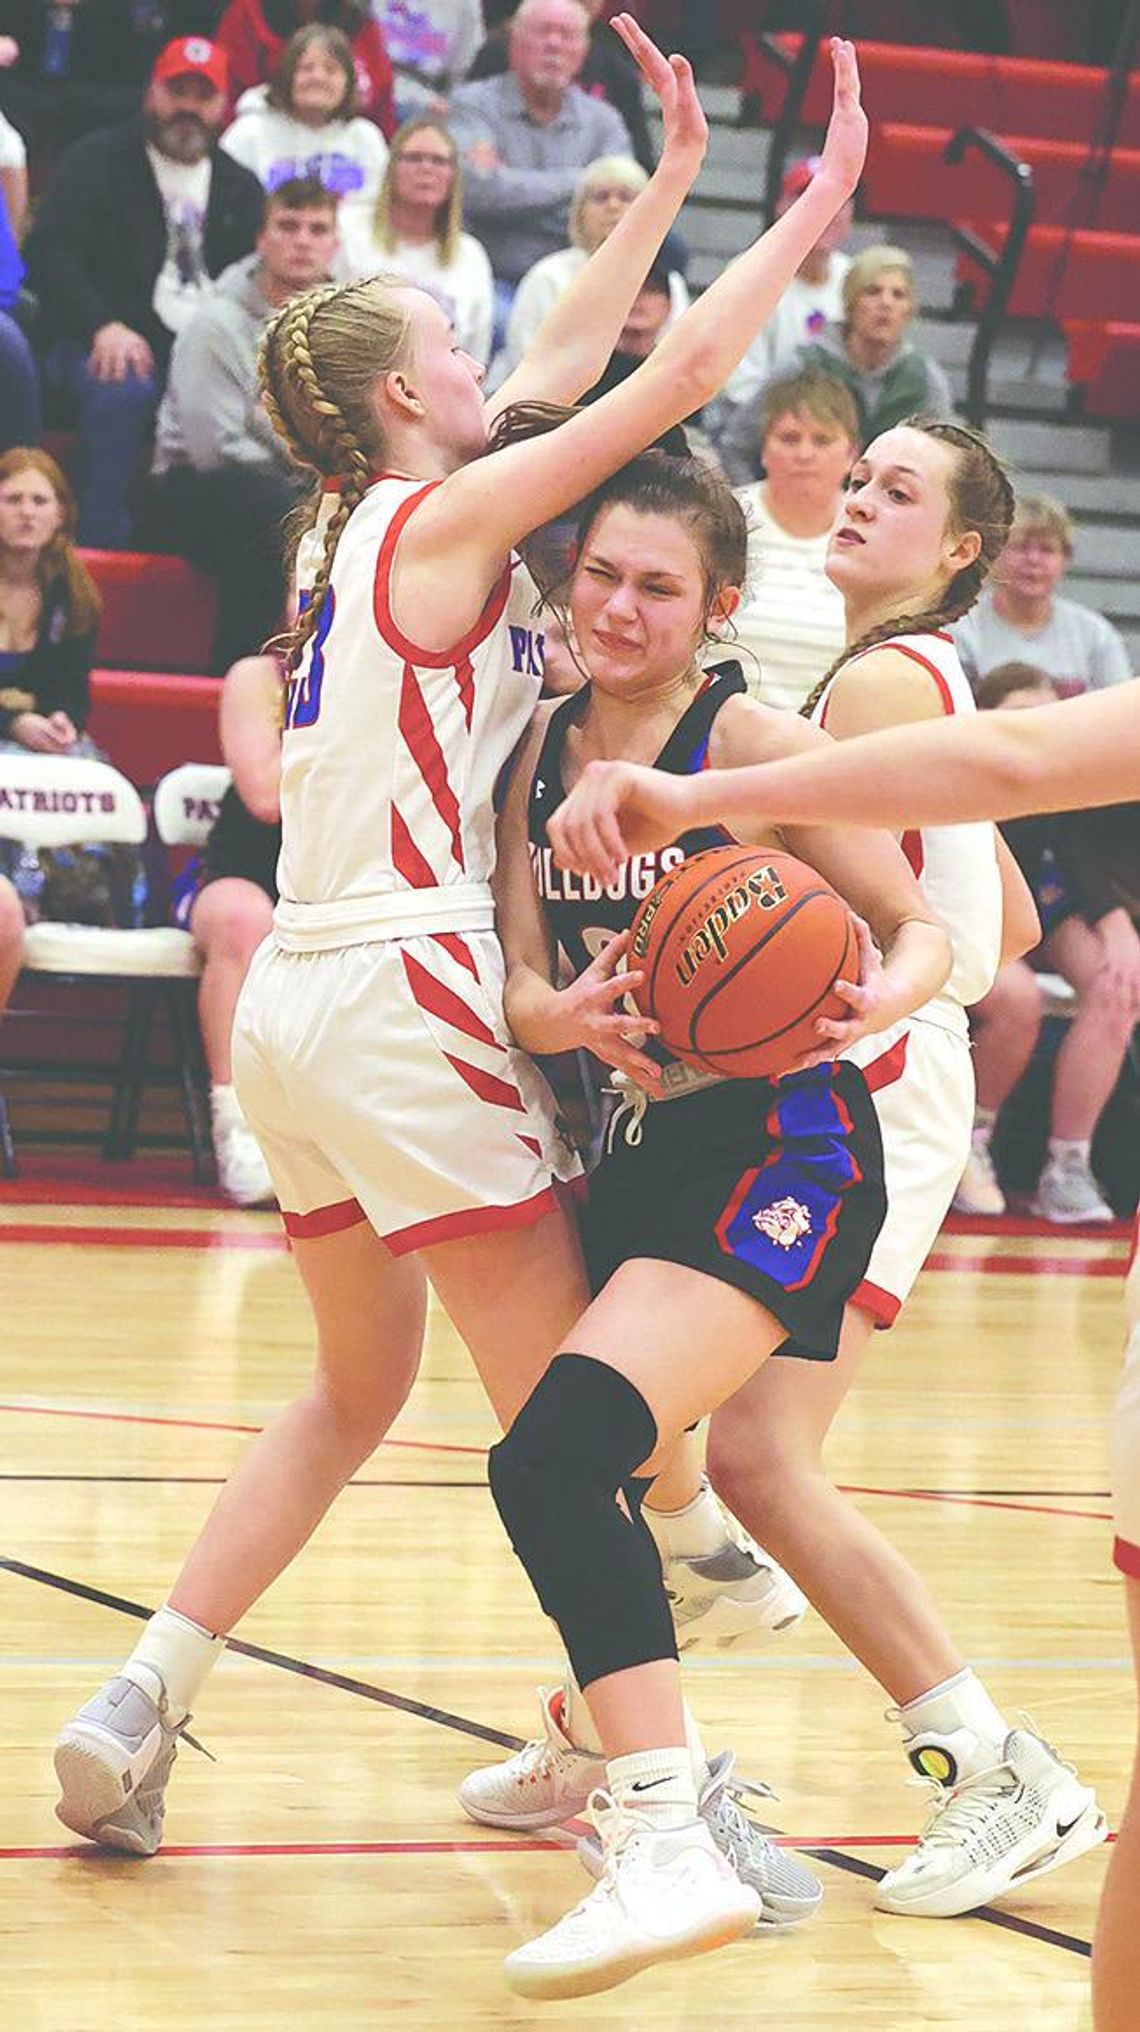 Groteluschen’s FT's send Bulldogs to districts